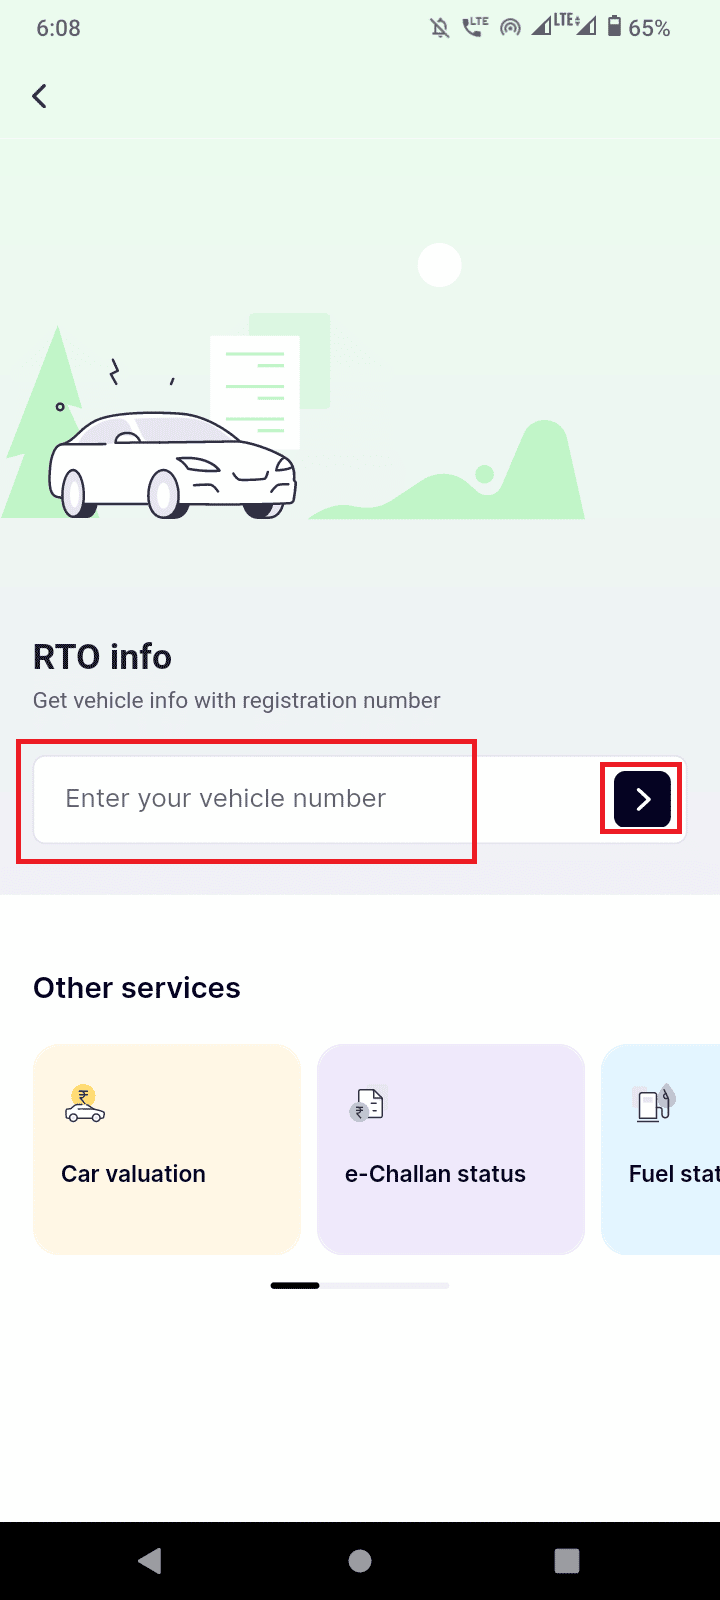 search on the app by entering the vehicle number and tap the arrow button